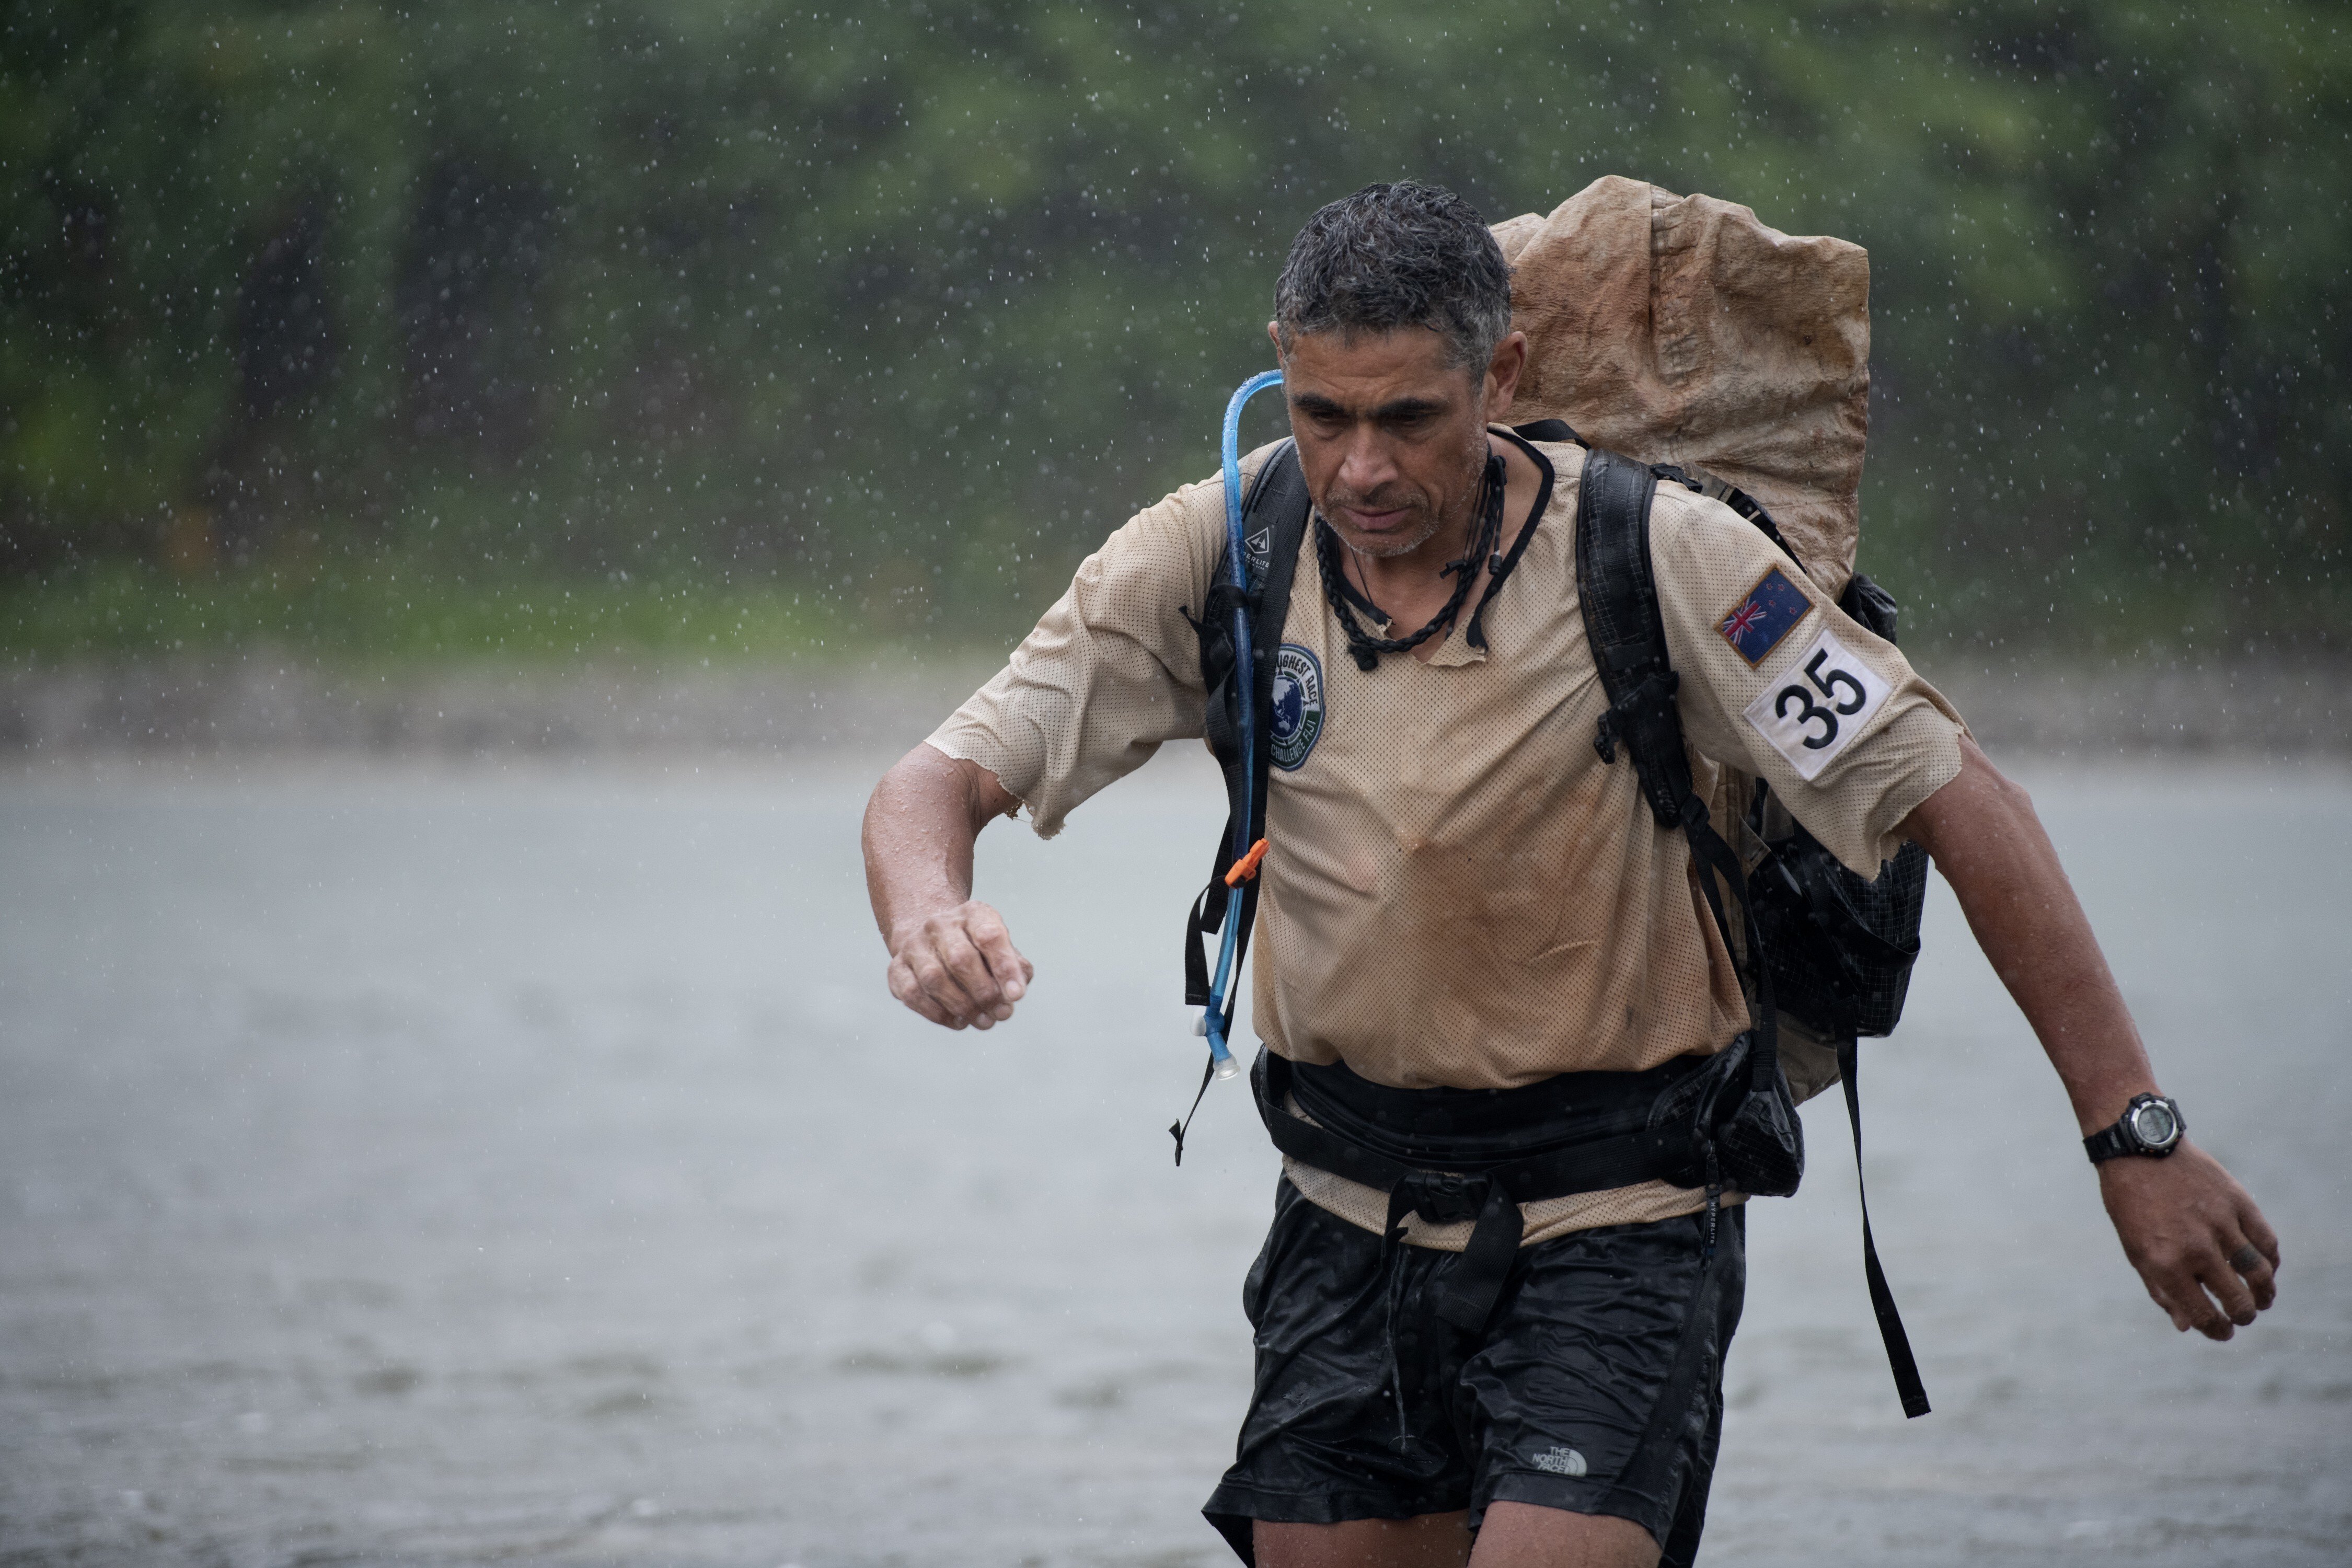 Nathan Fa’avae leads his team New Zealand to victory in the 670km Eco-Challenge in Fiji. Photo: Wynn Ruji/Amazon